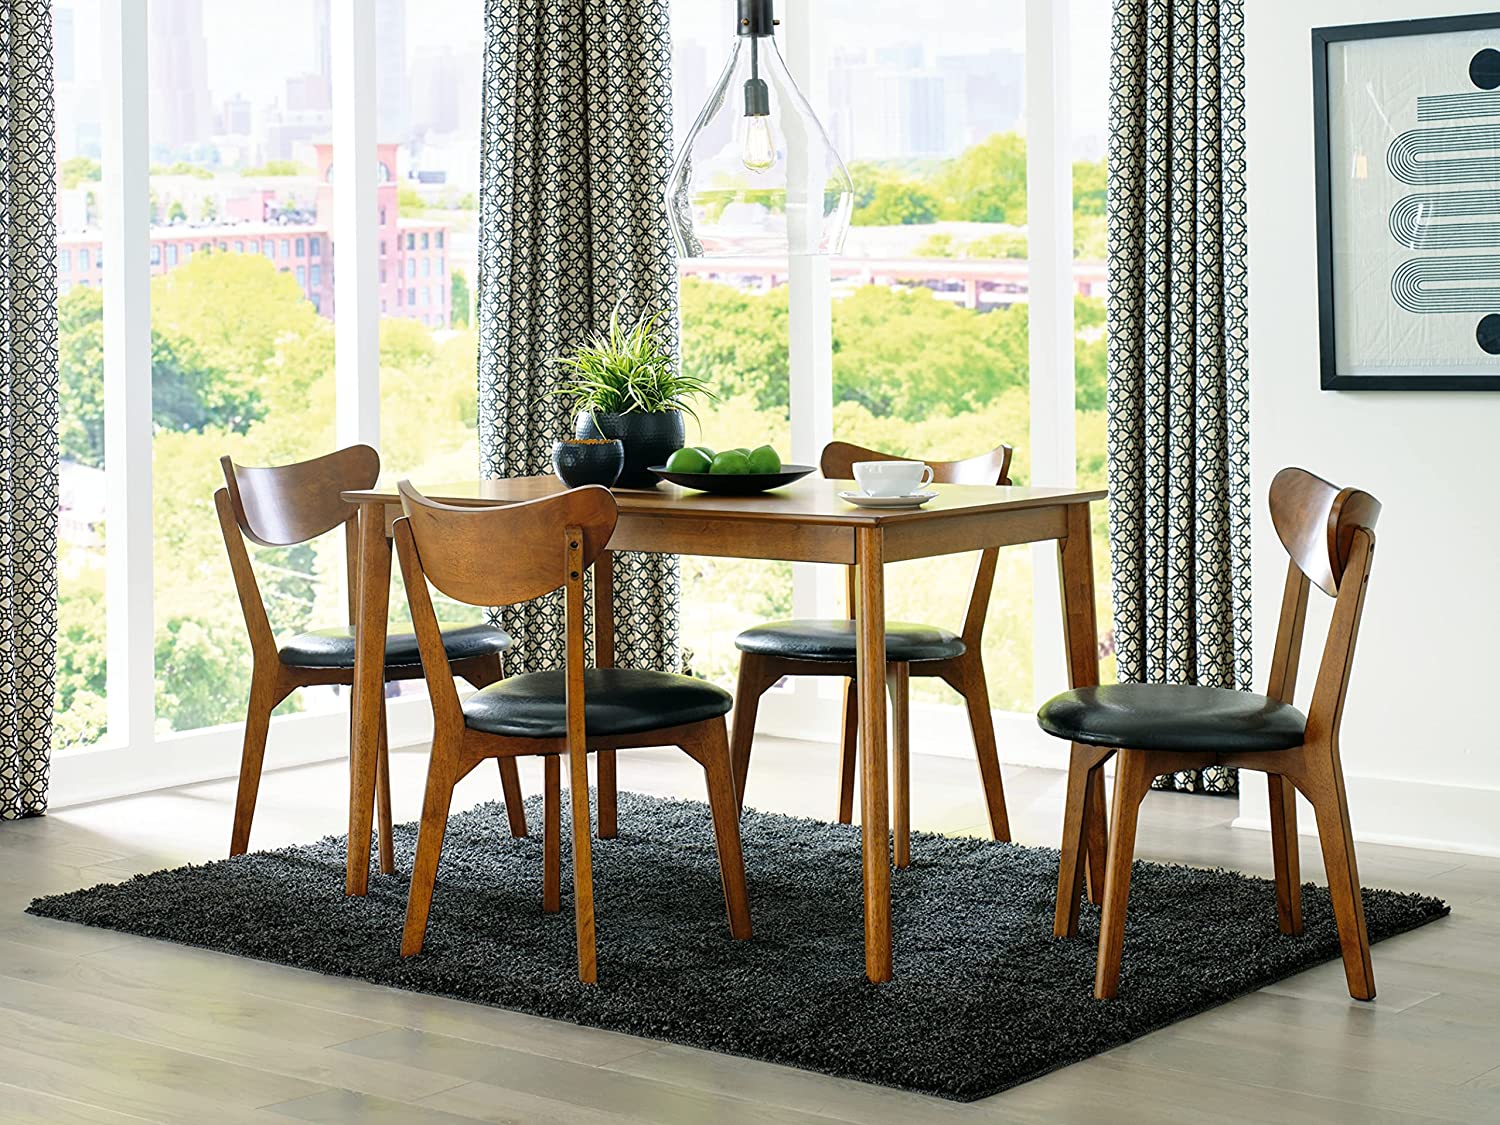 Brown and Black Urban Dining Table Set 